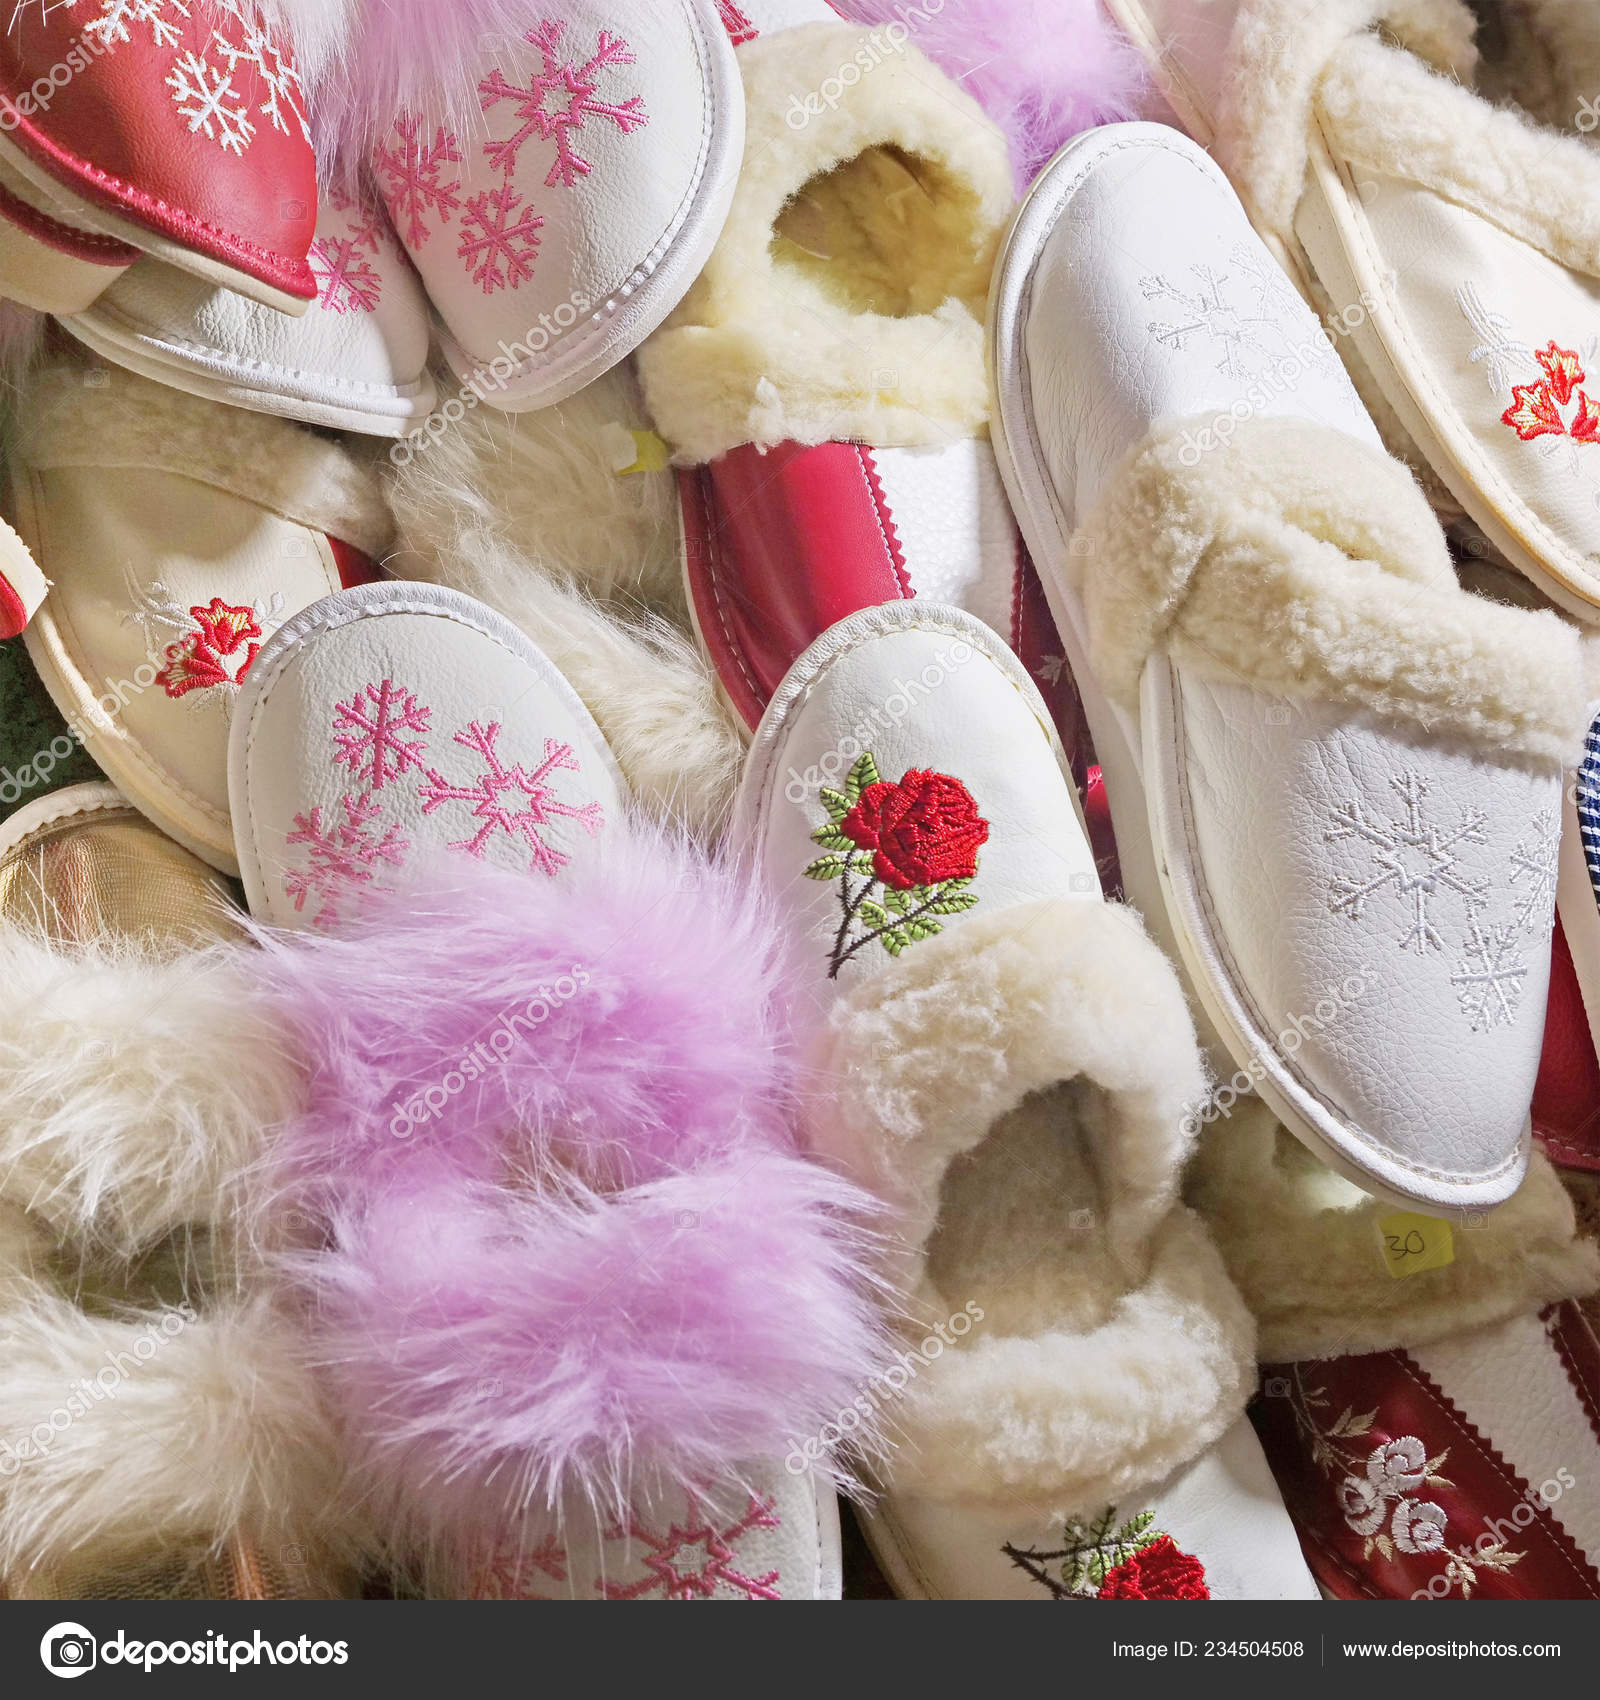 Sheepskin and Leather Slippers for Women